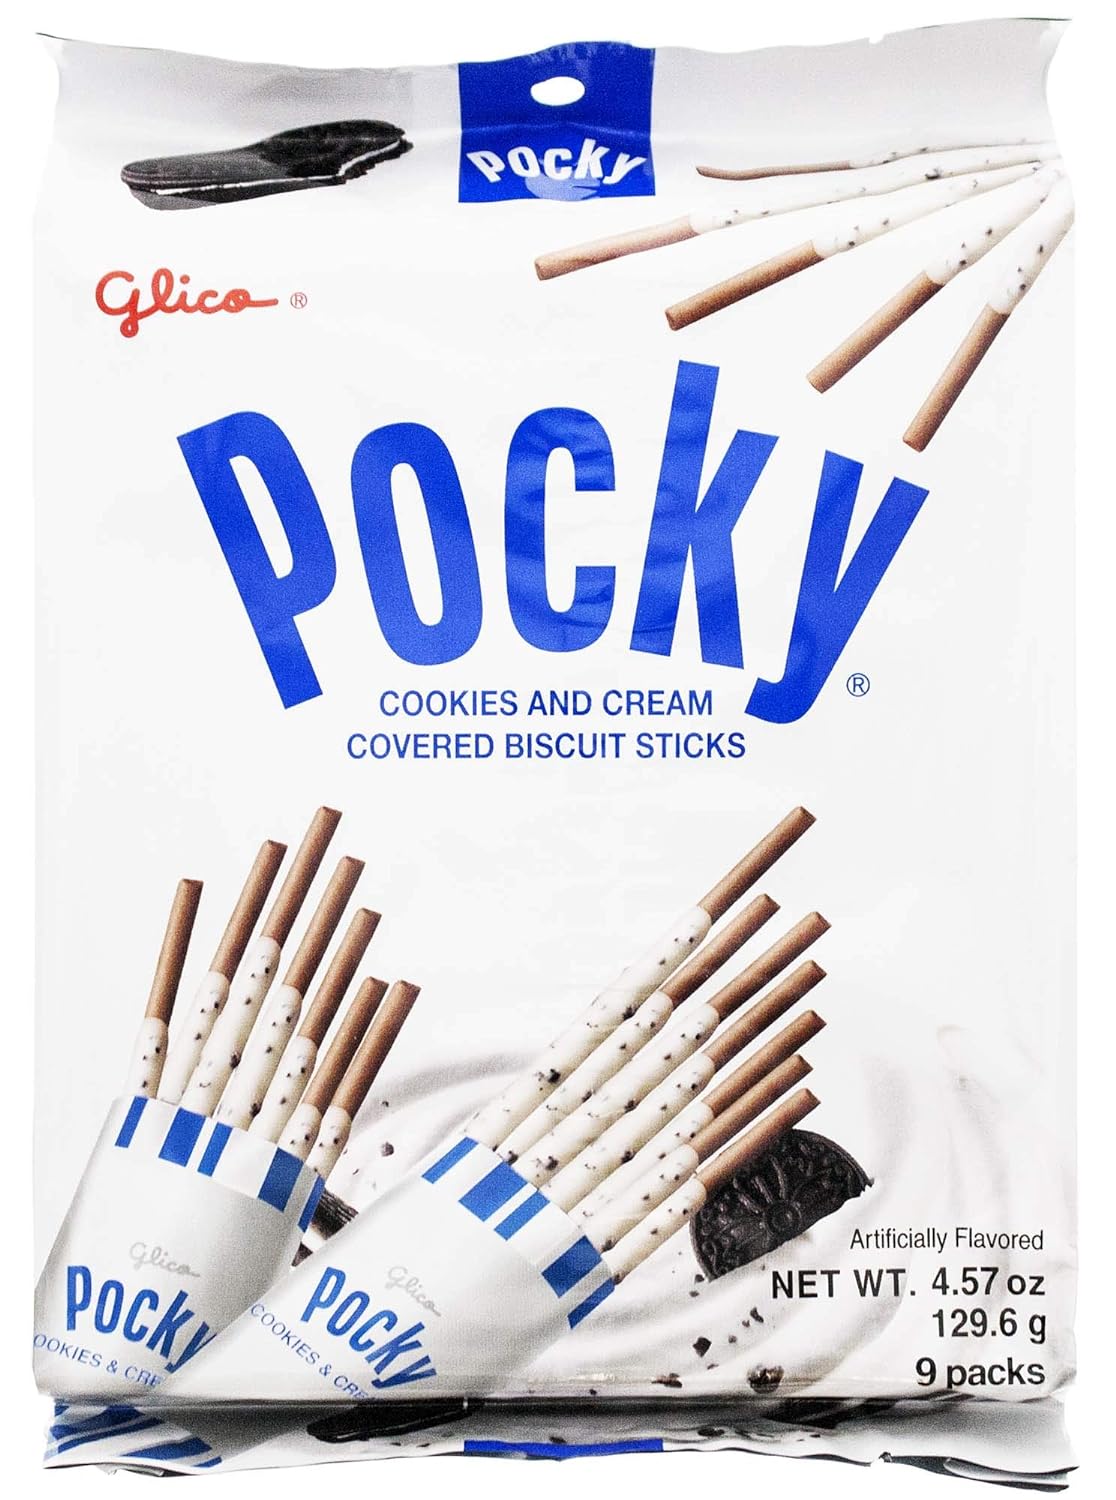 4.57-Oz Glico Pocky Cookies & Cream Covered Biscuit Sticks (9 Individual Bags) $2.79 w/ S&S + Free Shipping w/ Prime or $35+